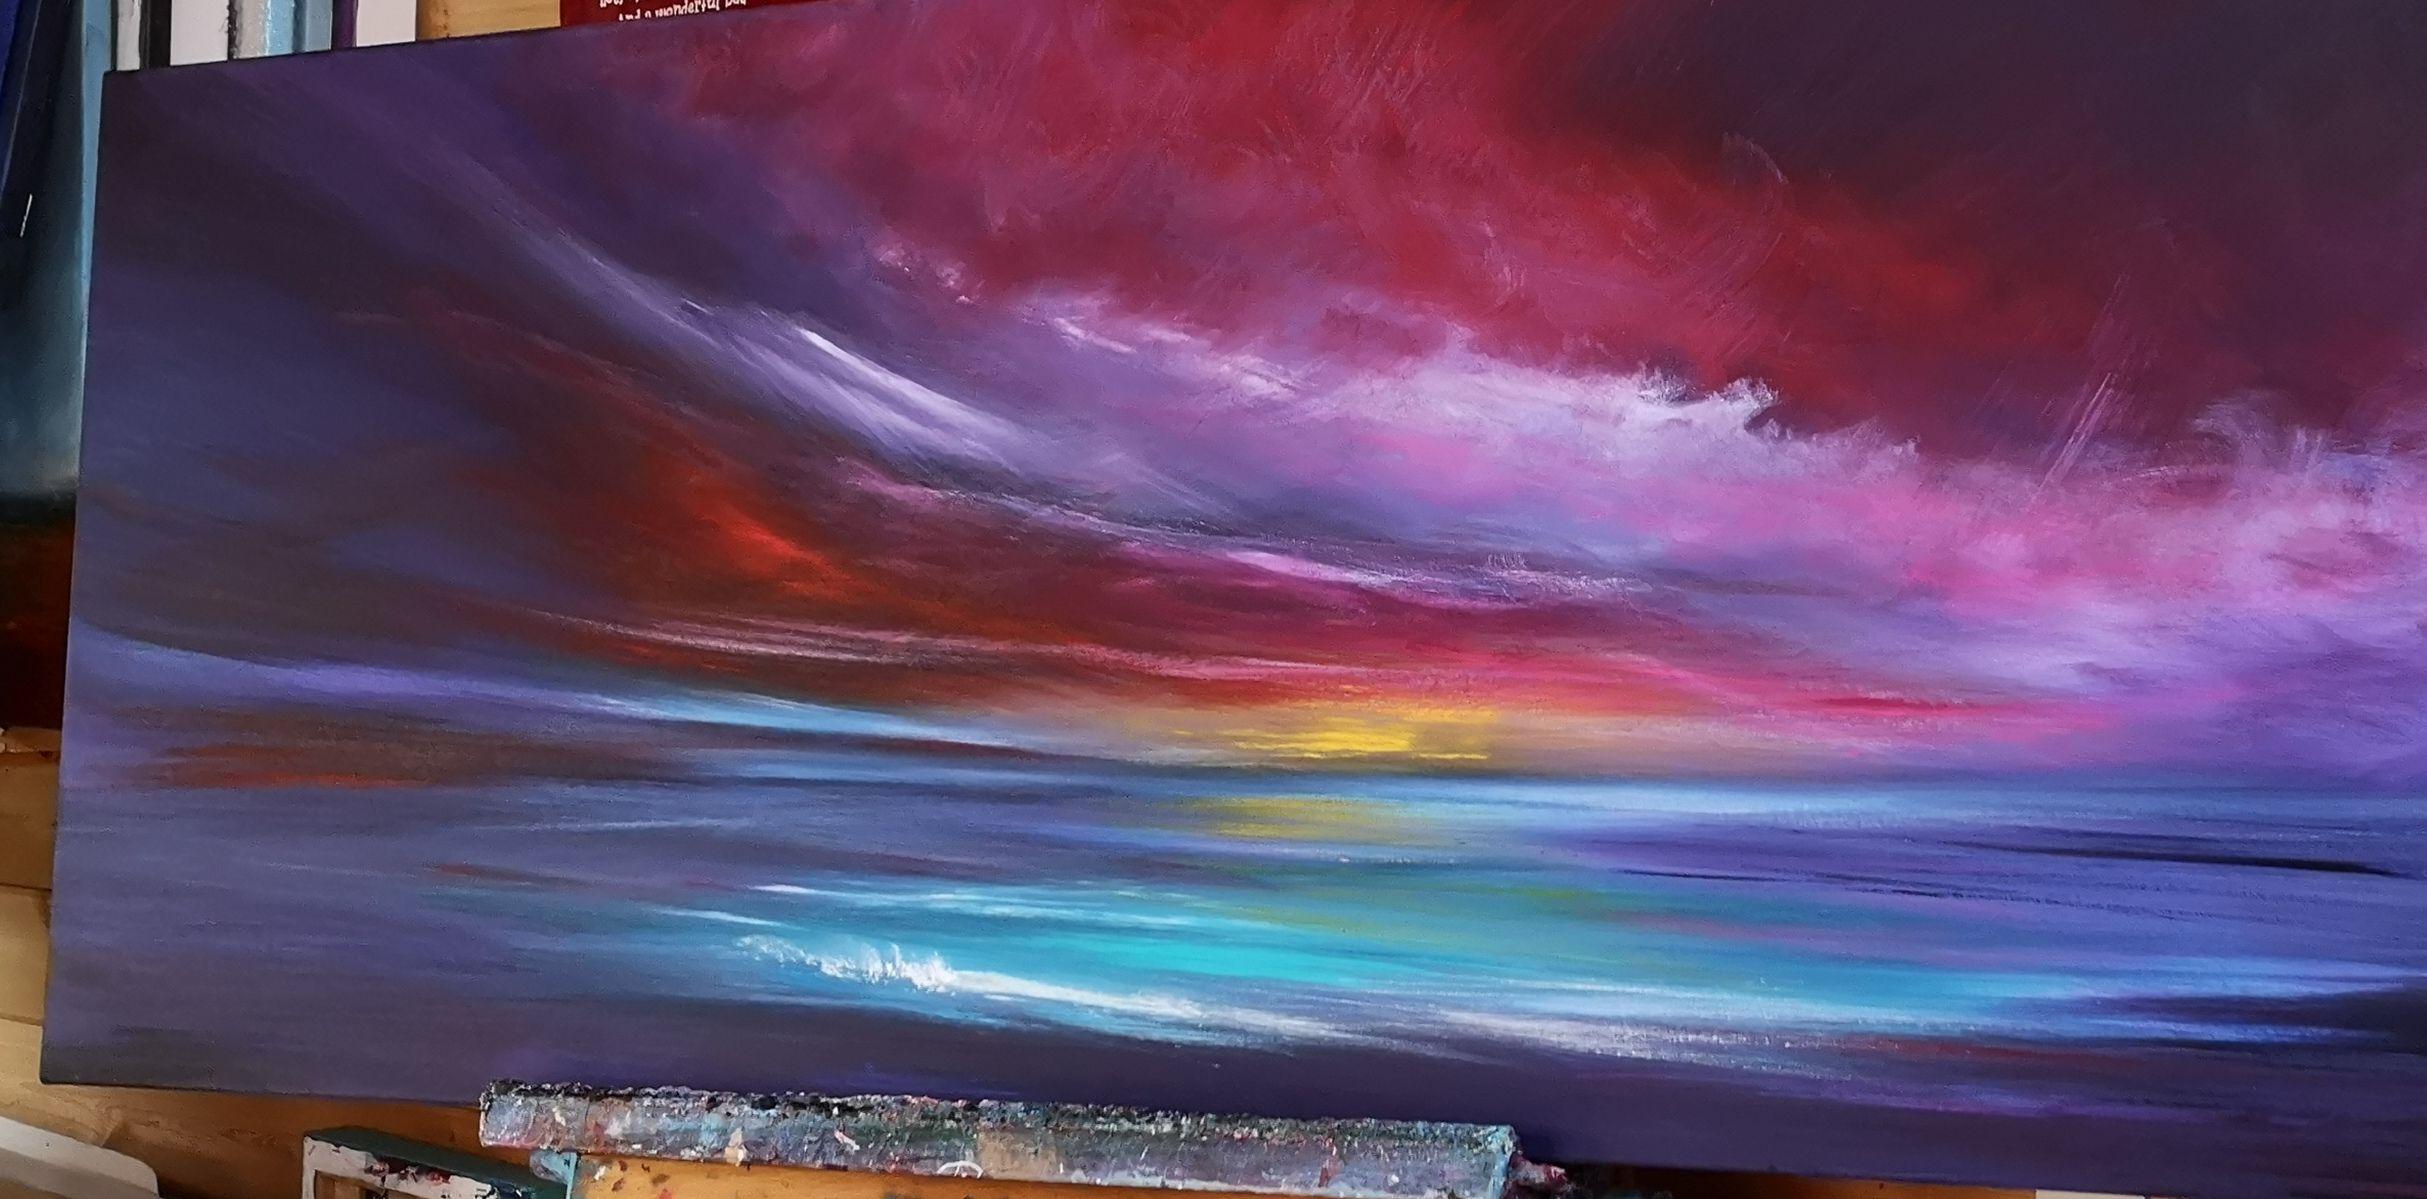 Incandescence, Panoramic Seascape, Painting, Acrylic on Canvas 3